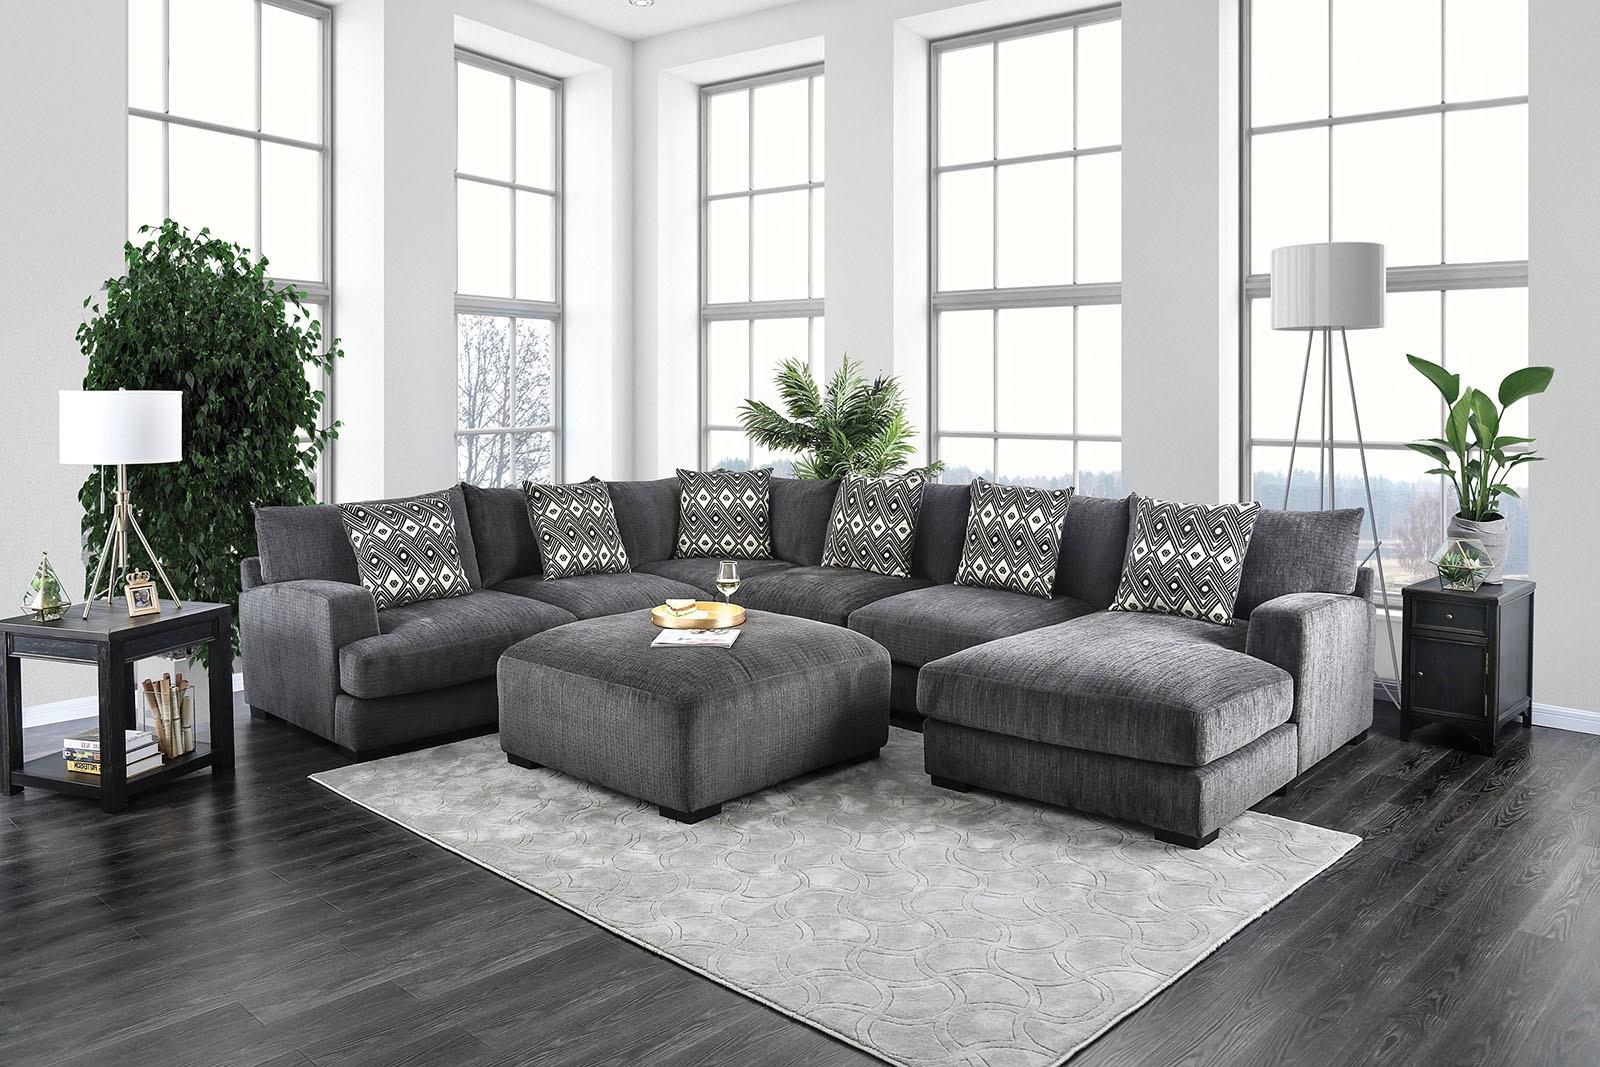 Contemporary Sectional Sofa CM6587-SECT-R Kaylee CM6587-SECT-R in Gray Chenille